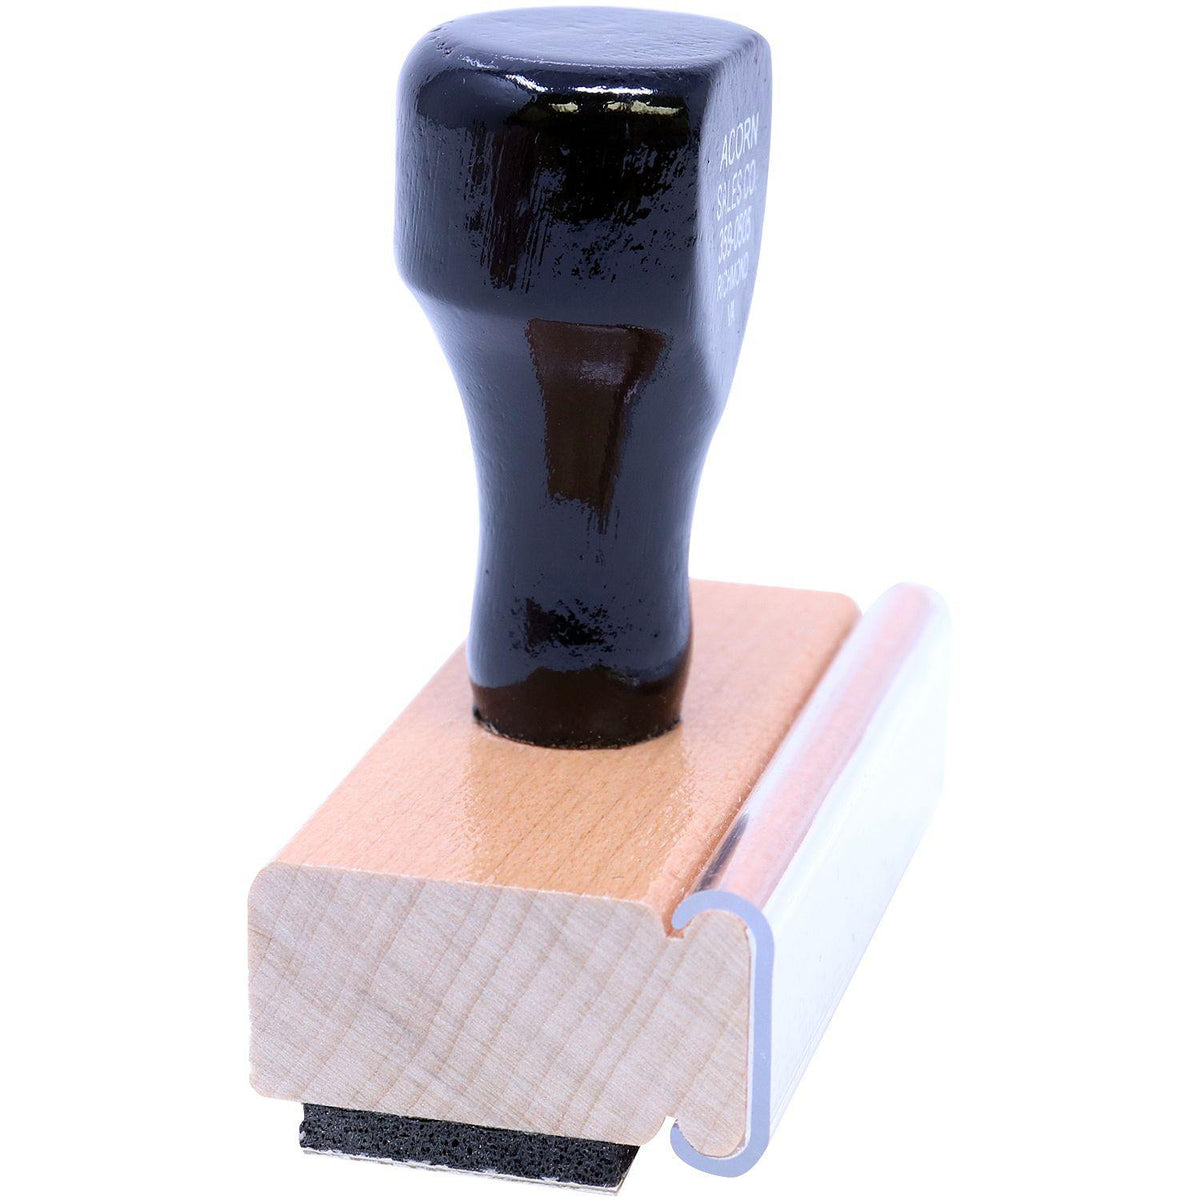 Side View of Fragile Rubber Stamp at an Angle